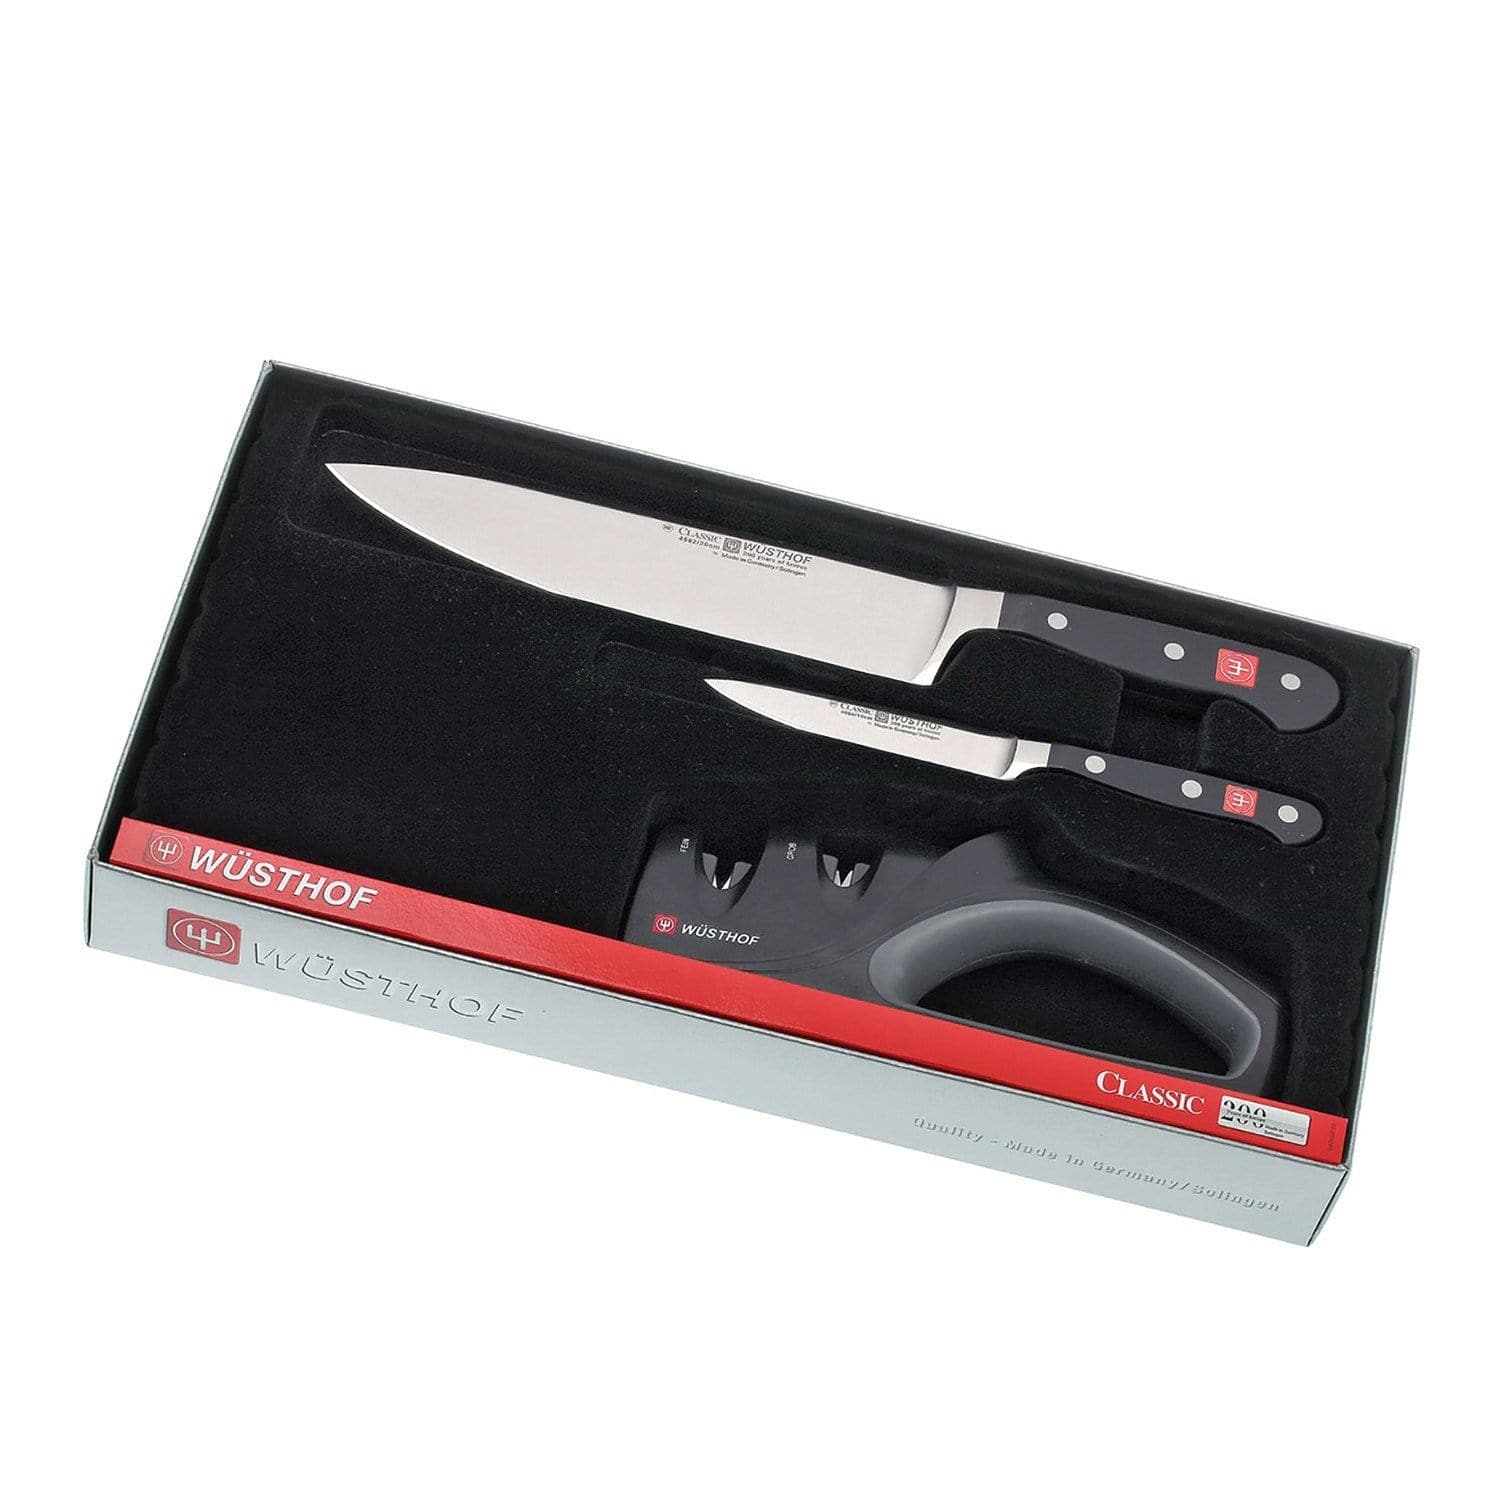 Wusthof Classic 2 Piece Knife Set with Knife Sharpener - Black and Silver - 9608-5 - Jashanmal Home